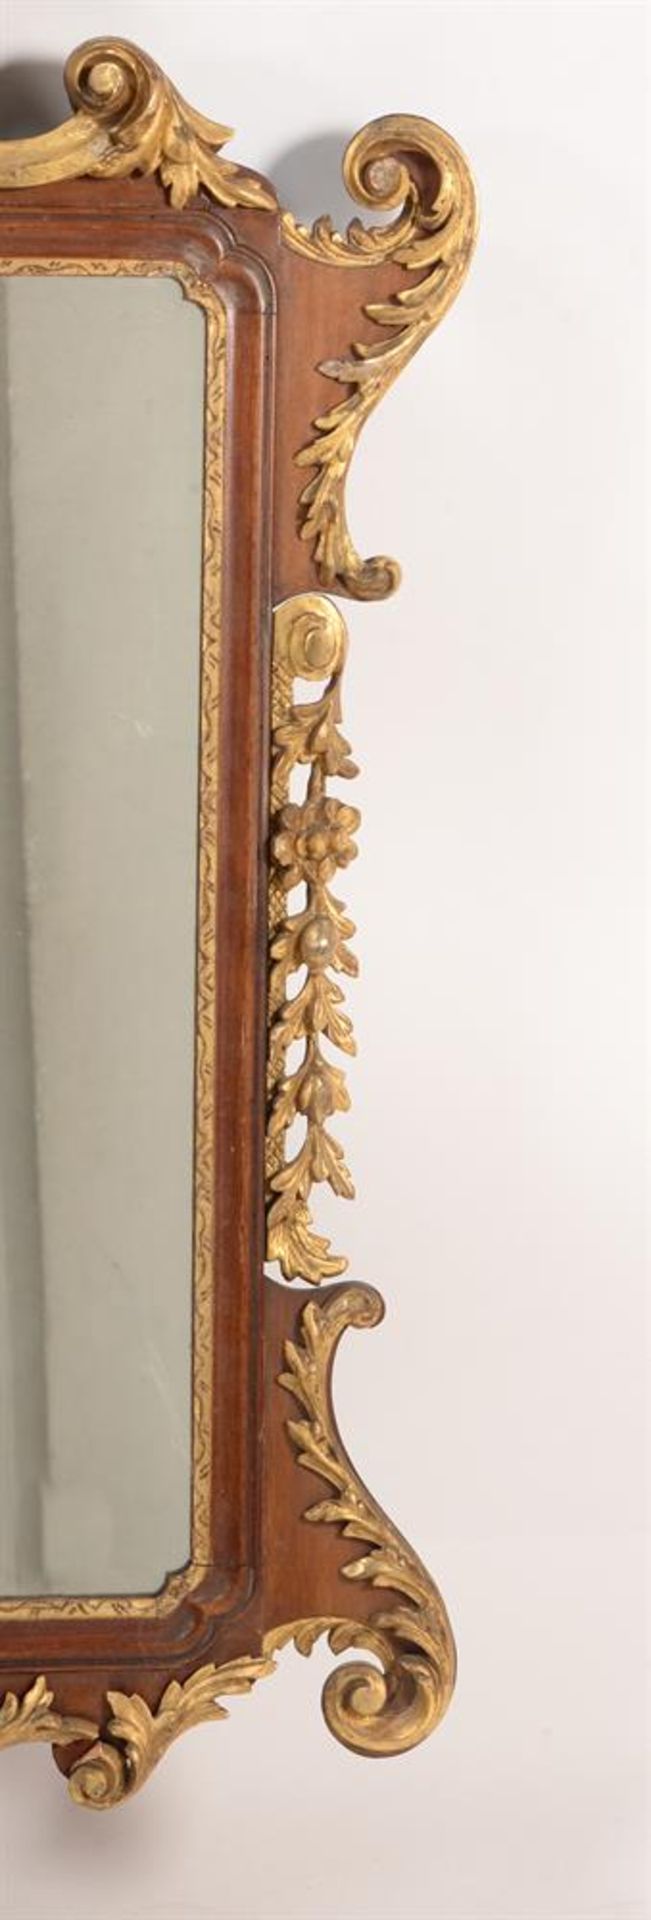 A MAHOGANY AND GILTWOOD OVERMANTEL WALL MIRROR, SECOND HALF 19TH CENTURY - Image 4 of 6